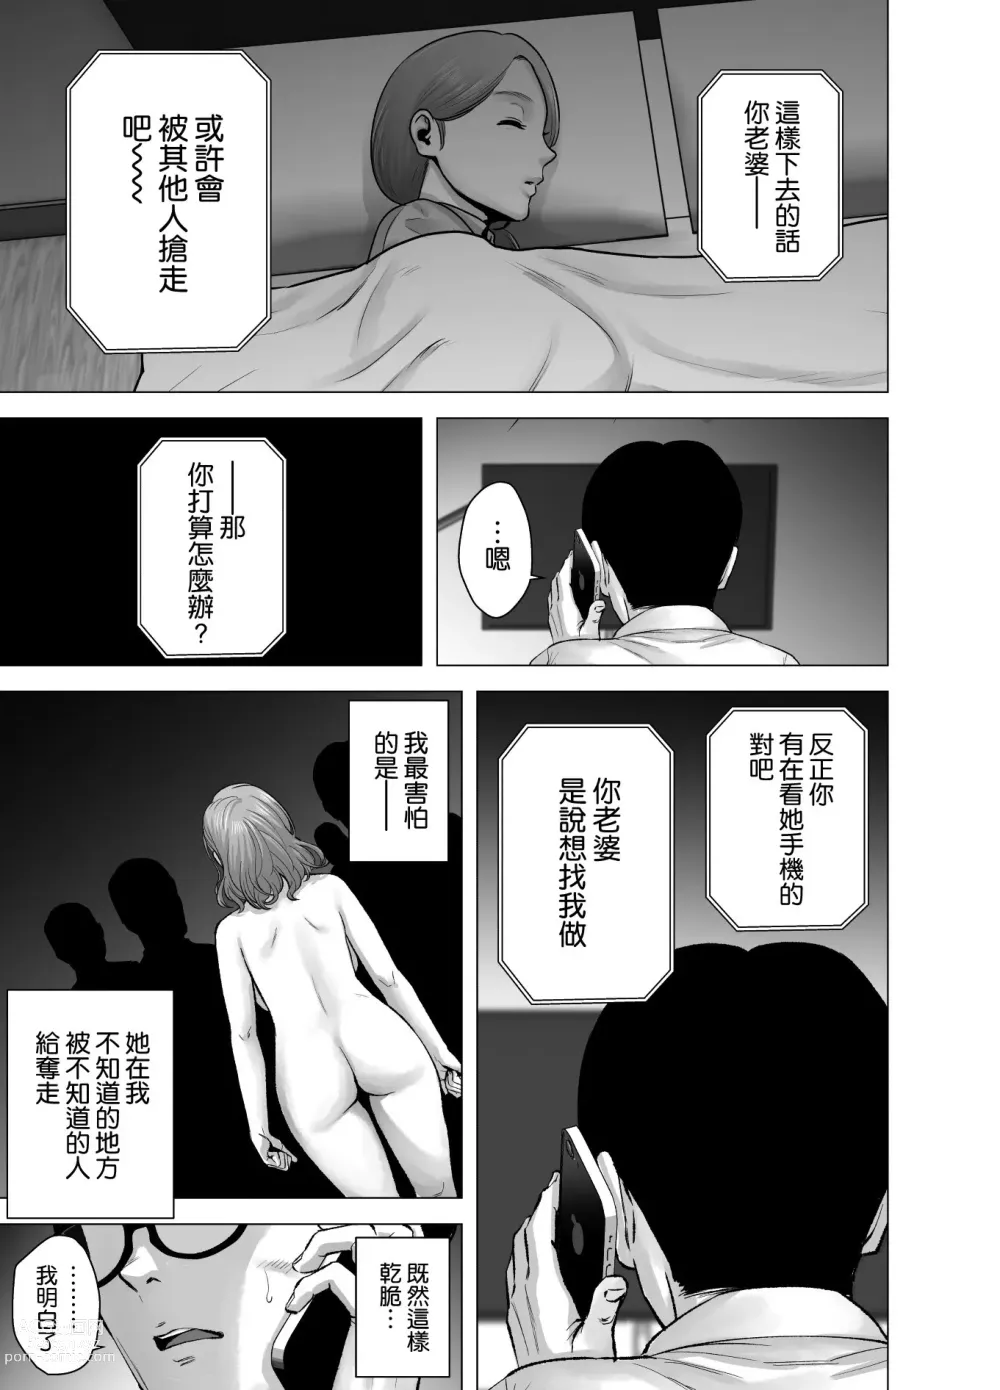 Page 134 of doujinshi Untitled Document 1+2 (decensored)